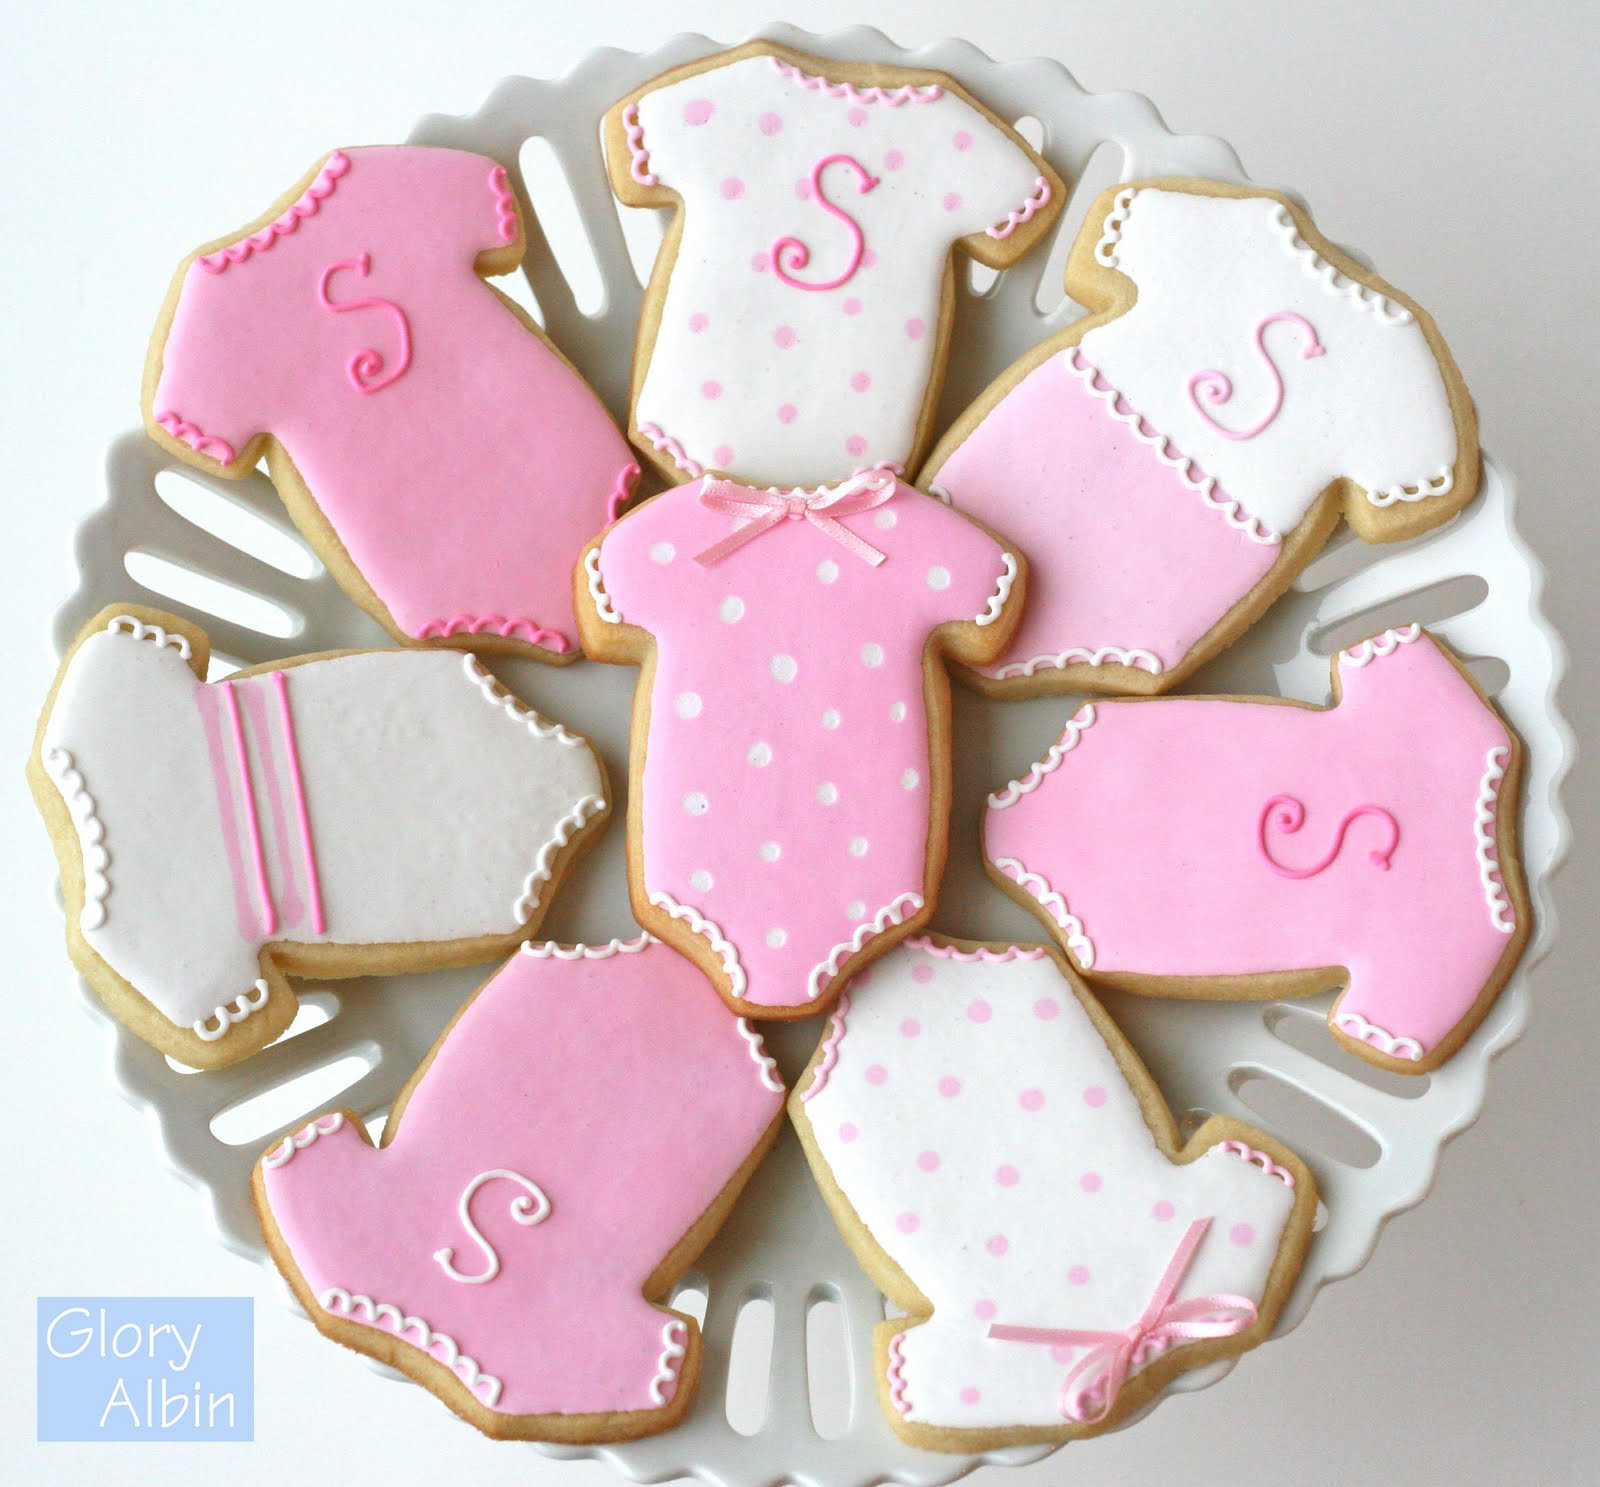 Sugar Cookies For Decorating
 Decorating Sugar Cookies with Royal Icing – Glorious Treats